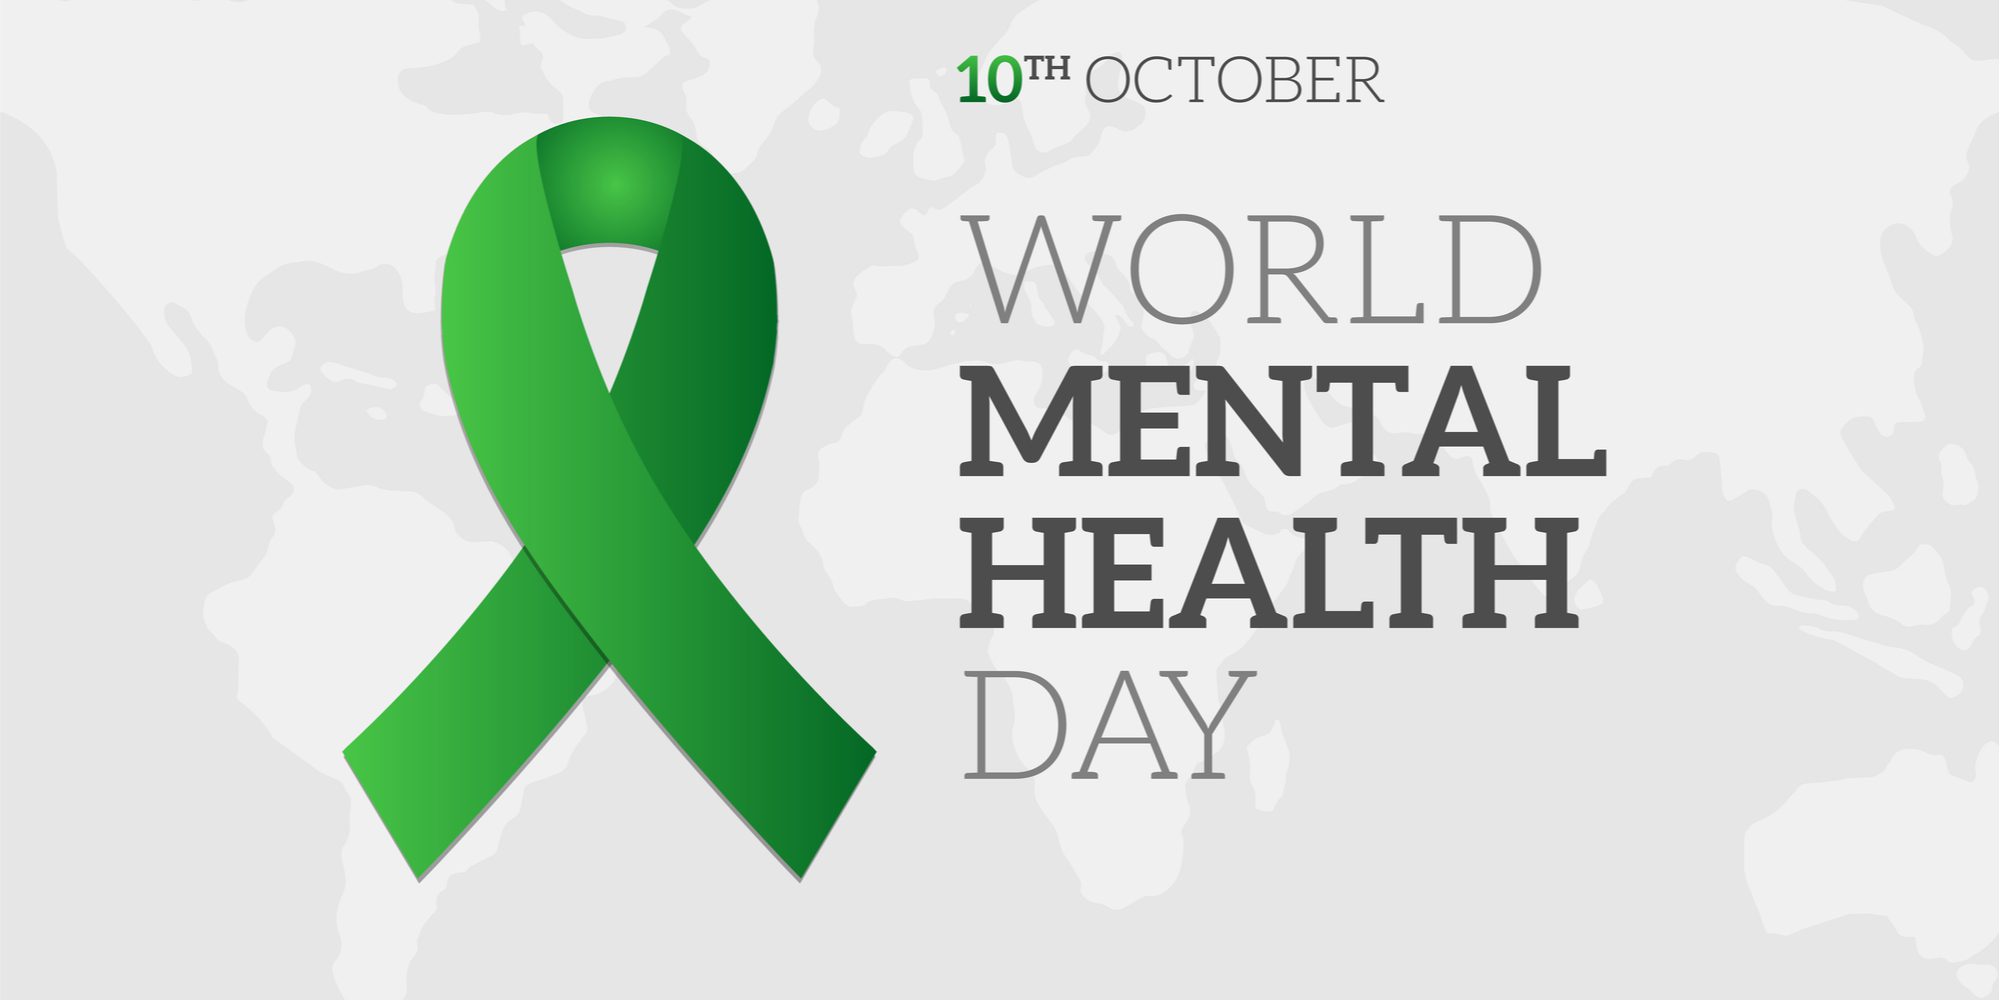 Mental Health Day October 10th